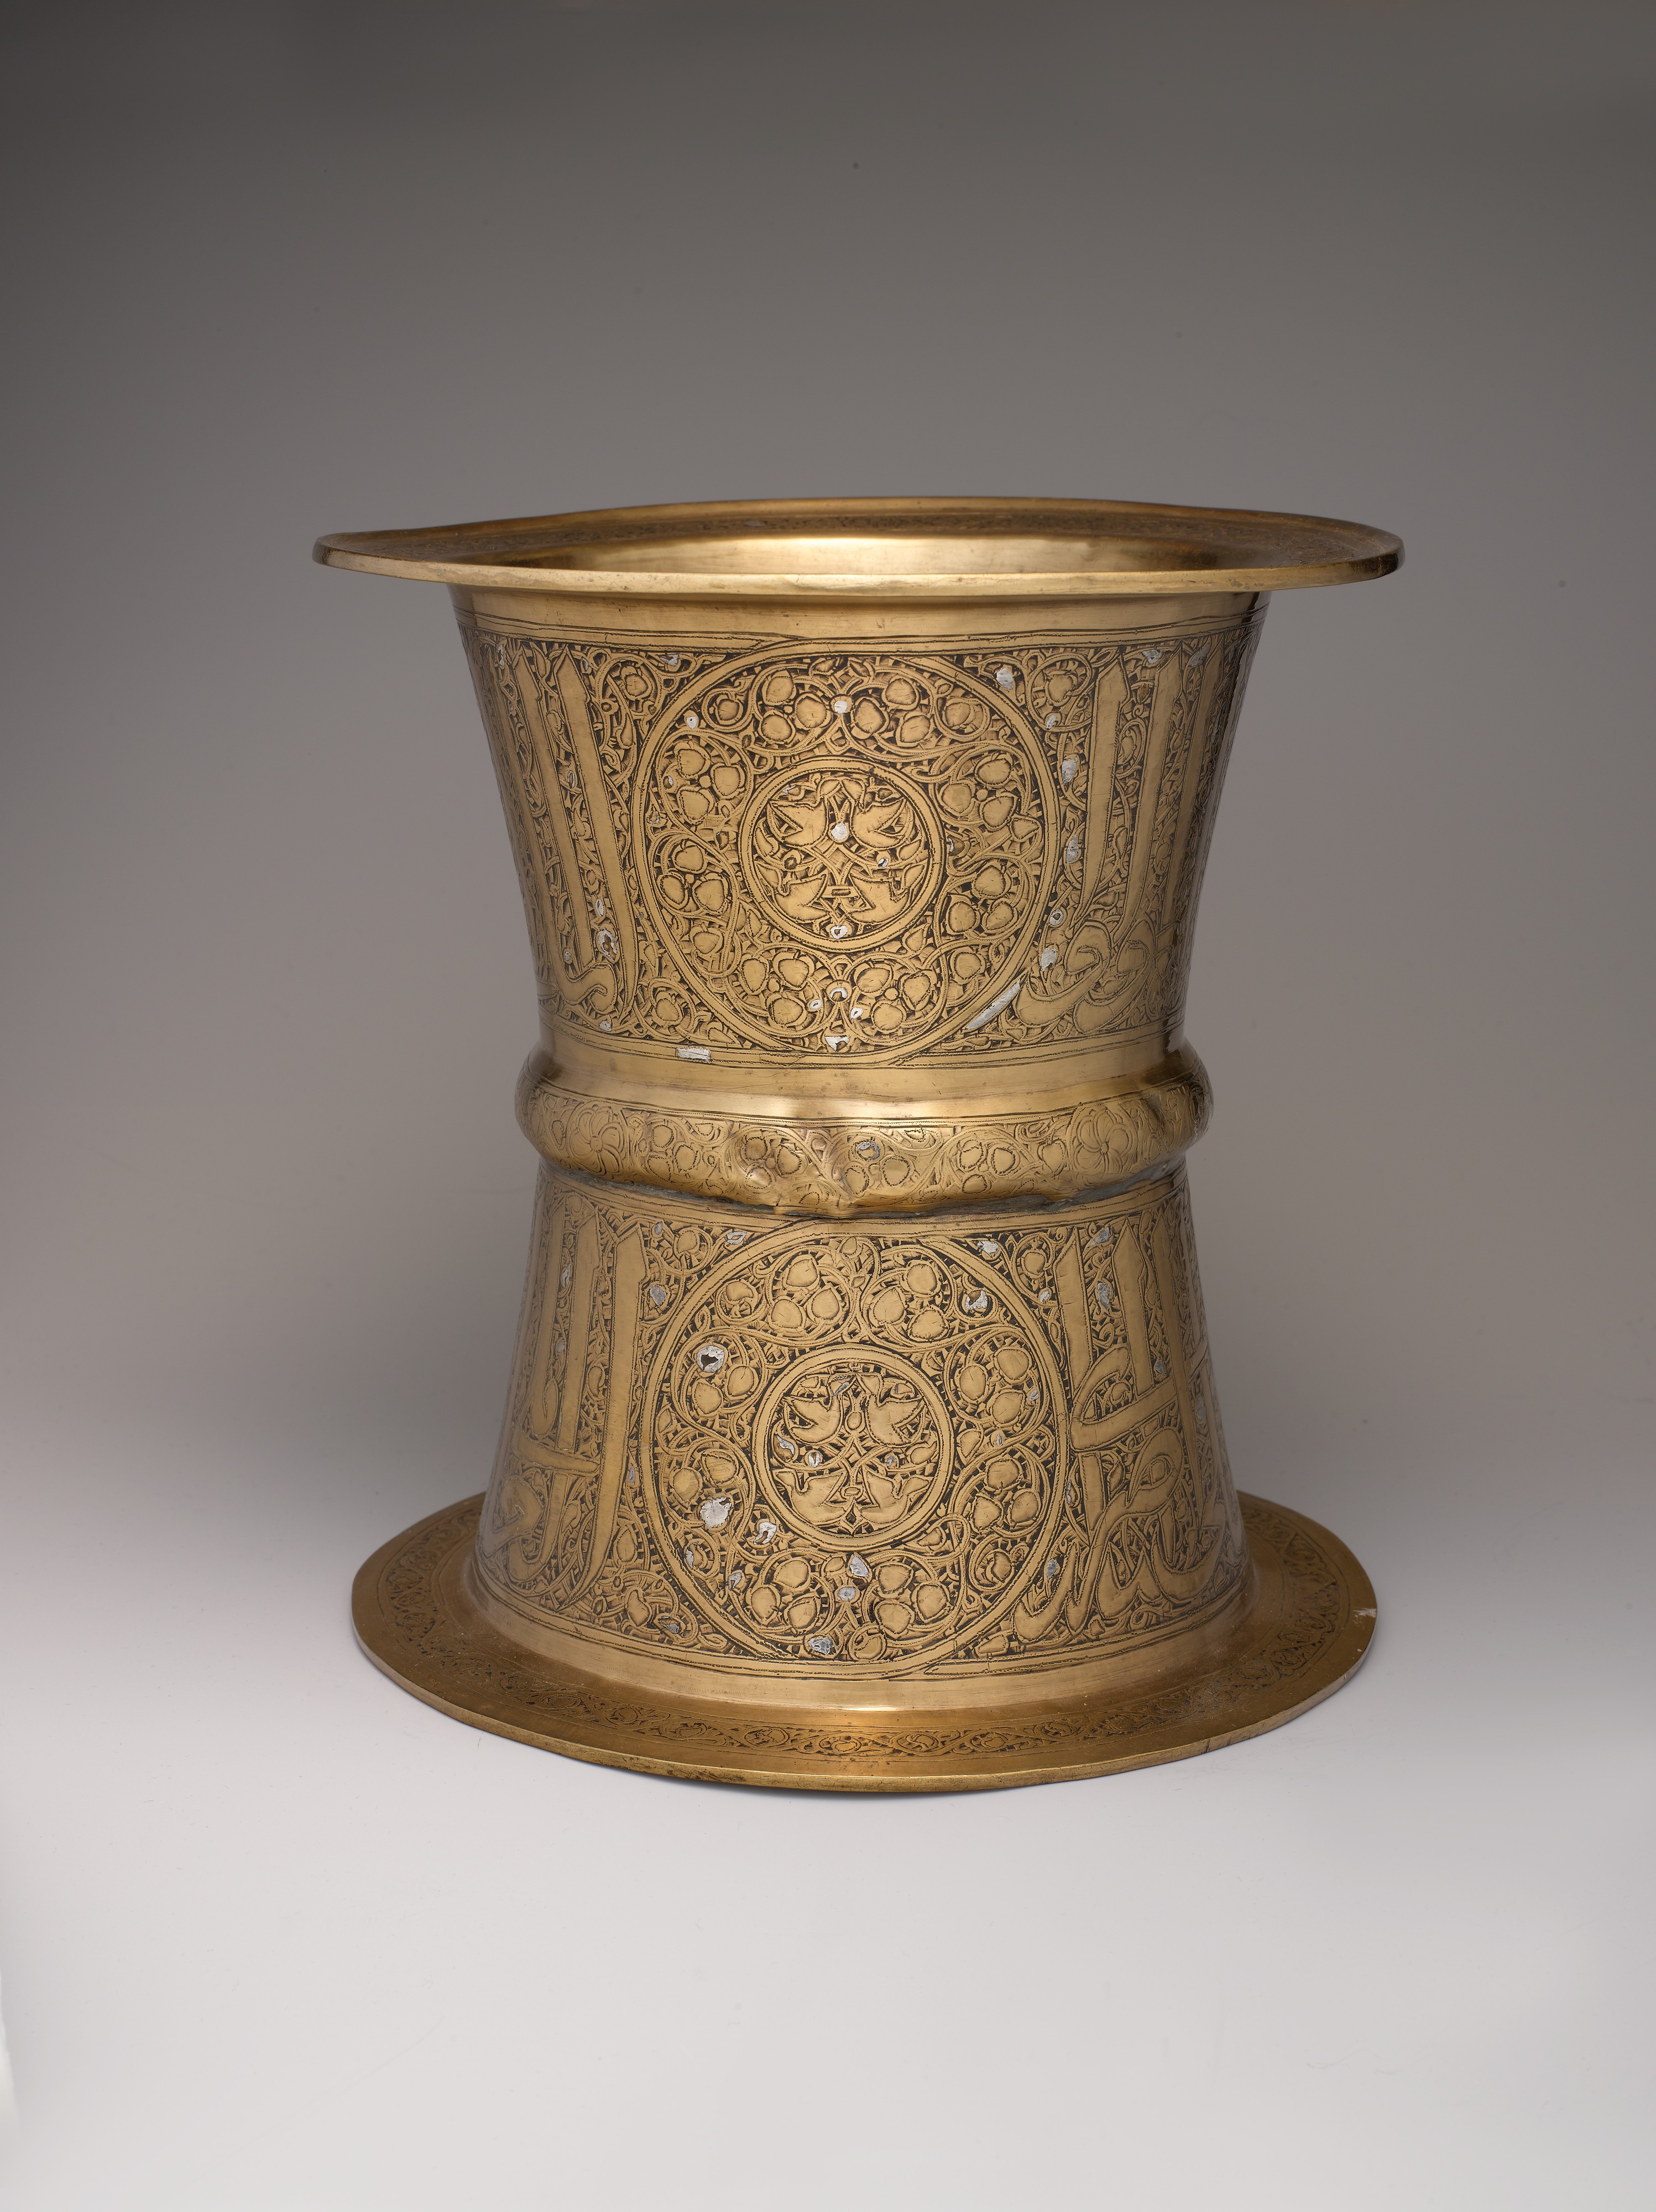 Tray Stand | The Metropolitan Museum of Art